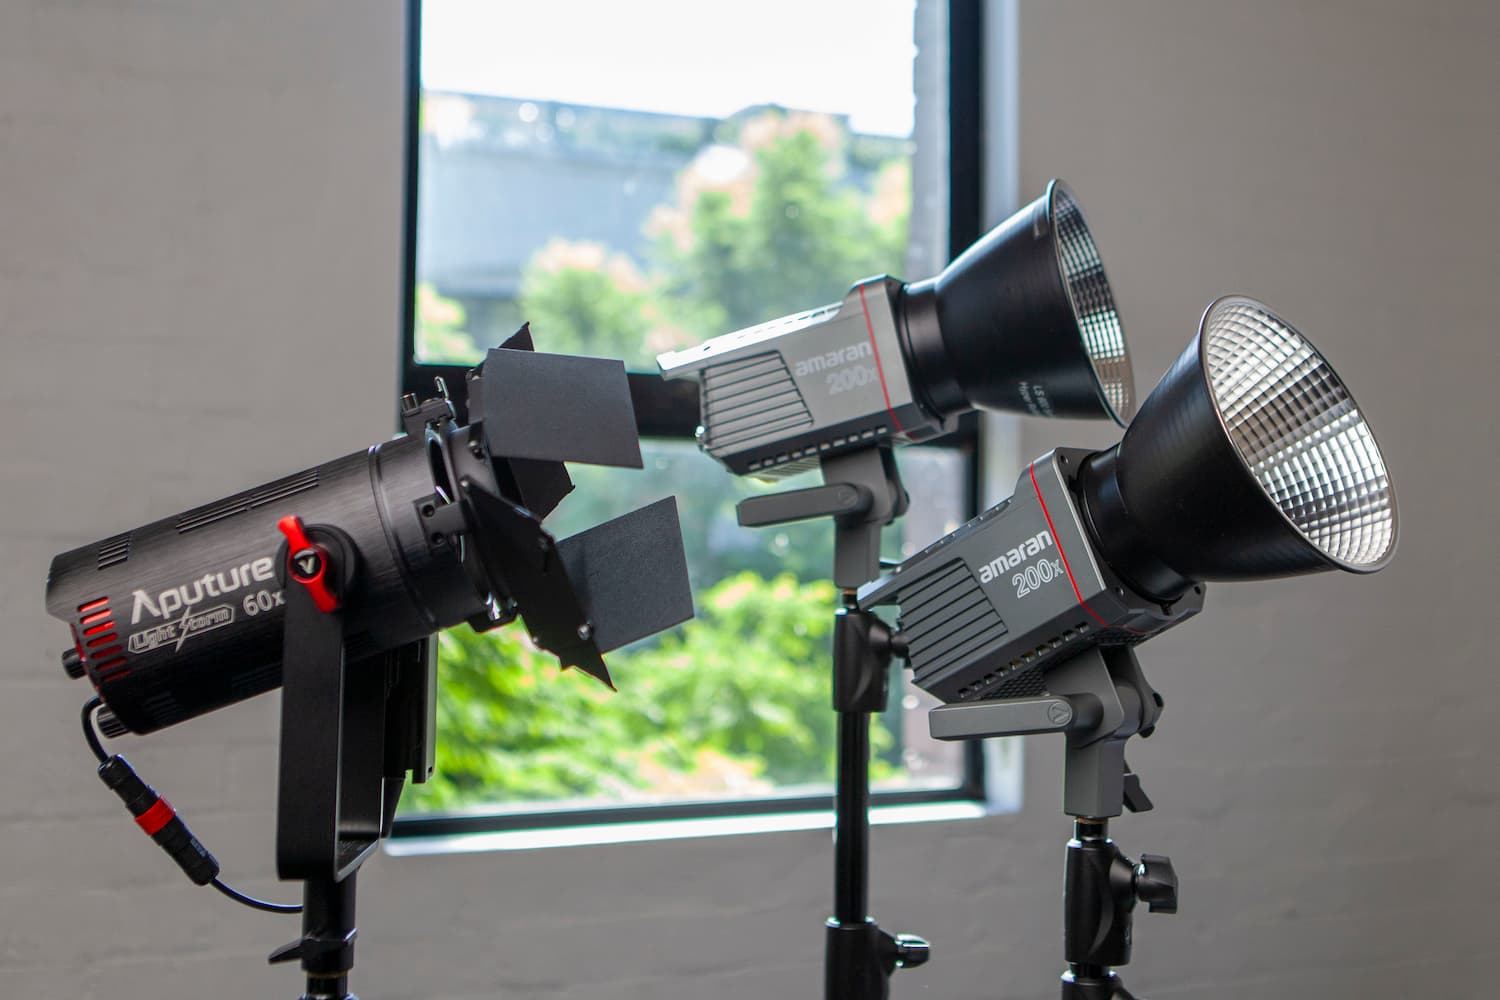 Three professional studio lights on stands ready for a photoshoot or video recording session, with a window providing natural light in the background.